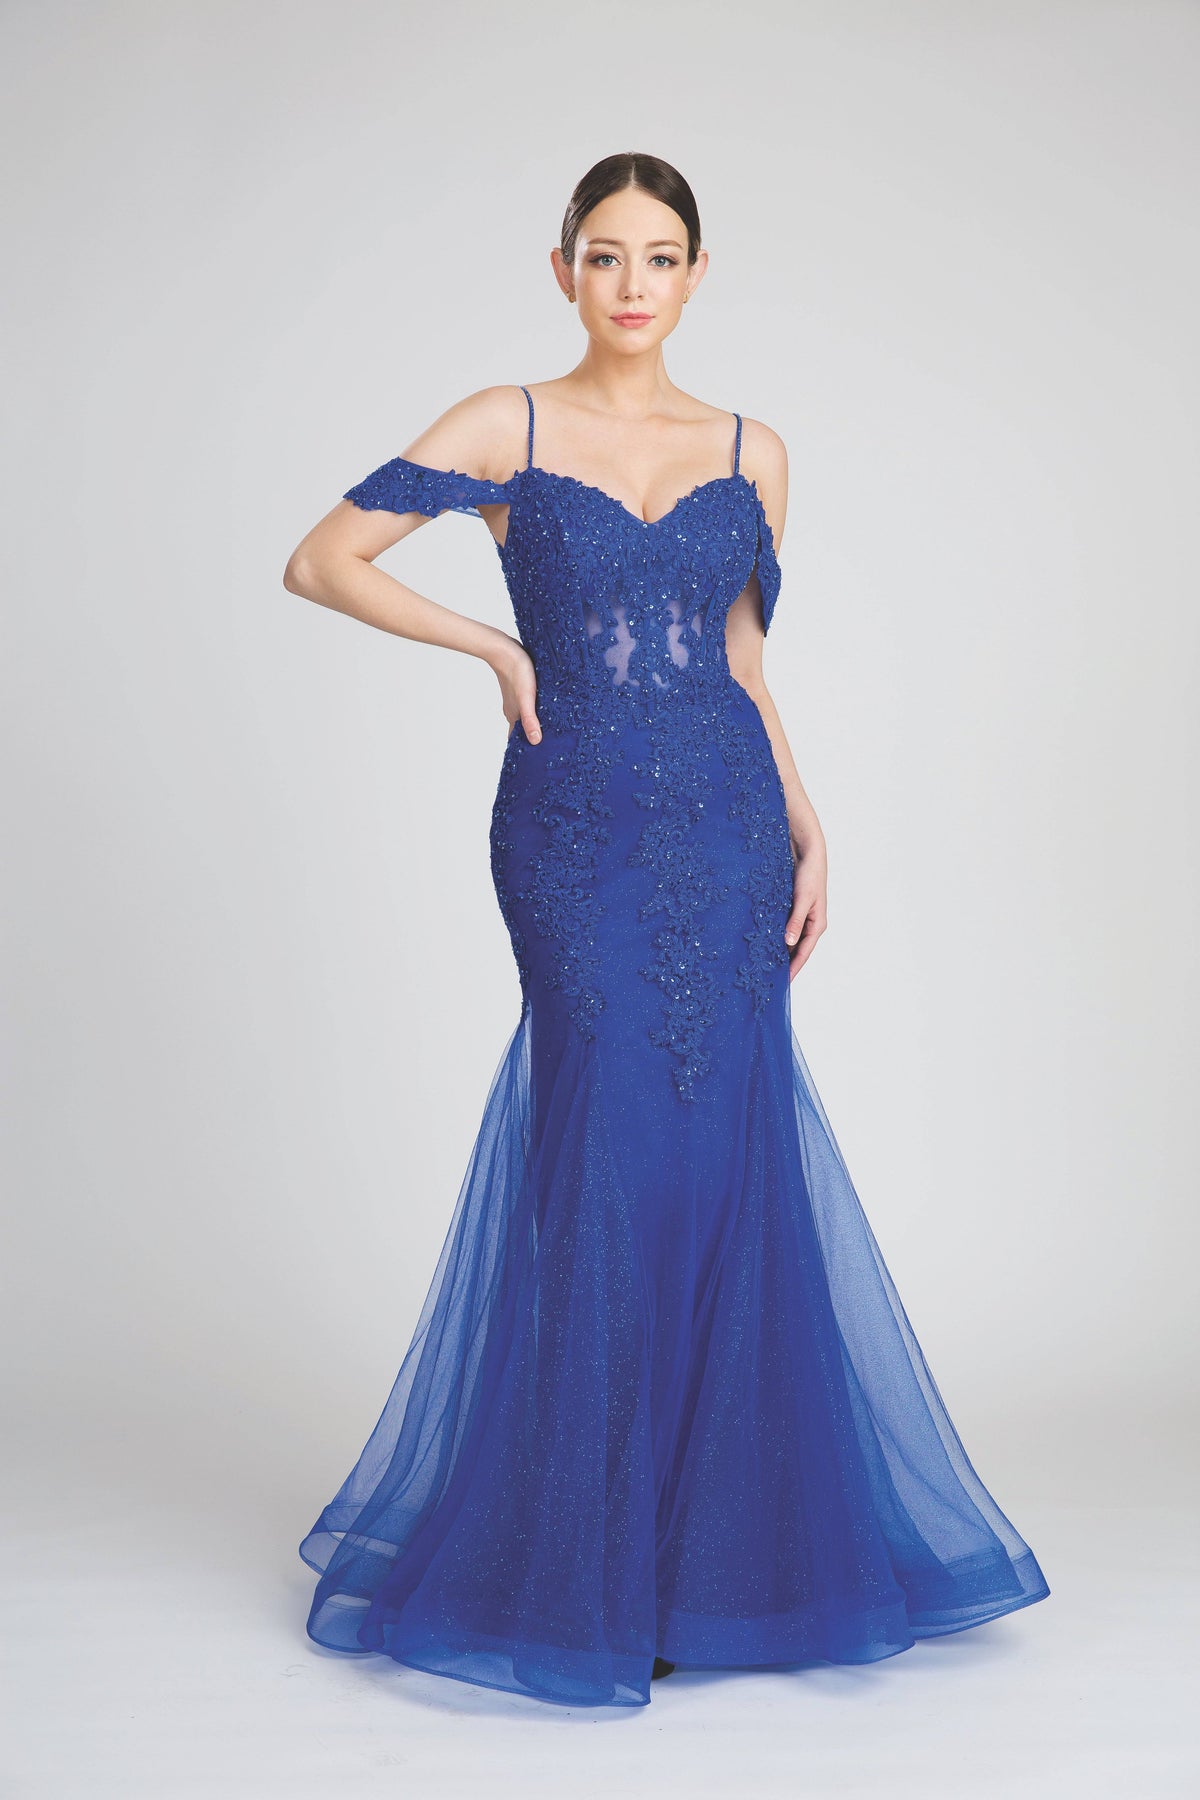 Fiesta 40197 Sparkling Lace & Sequin Mermaid Dress - NORMA REED